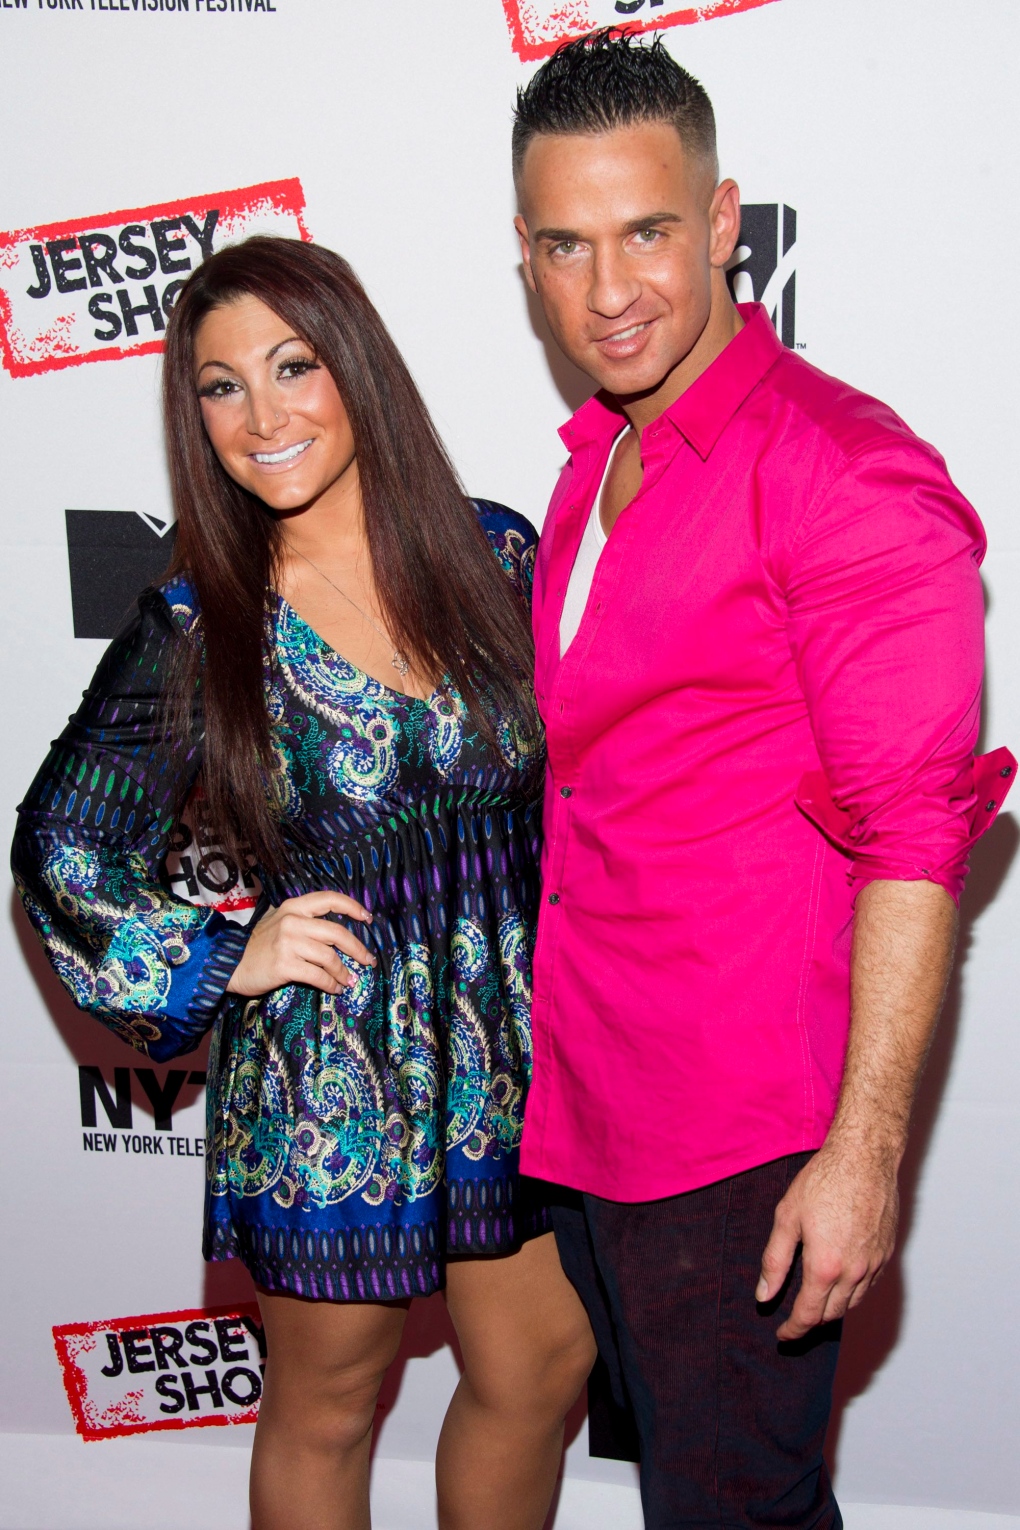 Deena Cortese and Mike "The Situation" Sorrentino 